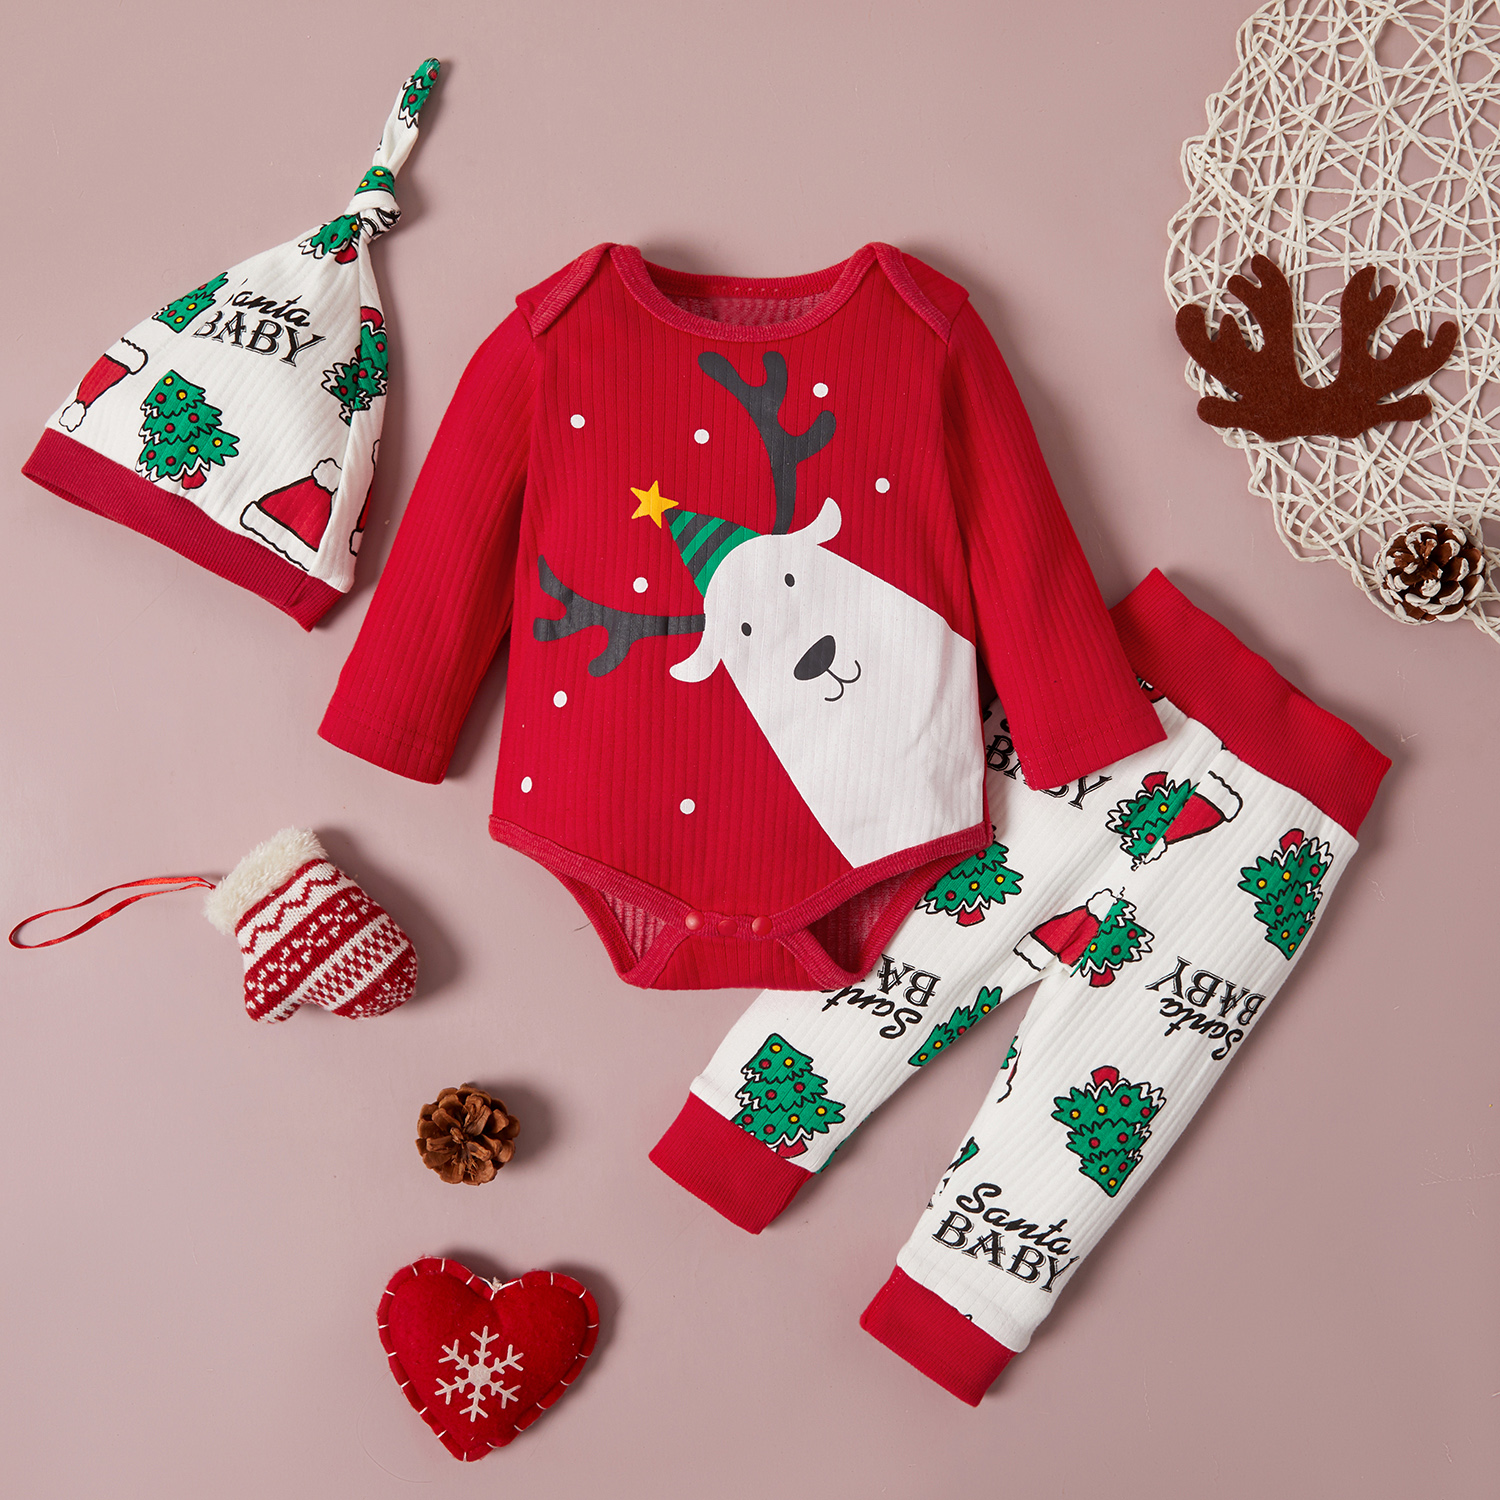 3pcs Baby Unisex Party Animal & Elk Baby's Sets Christmas Romper Fashion Cute Infant Clothes Outfit Clothing